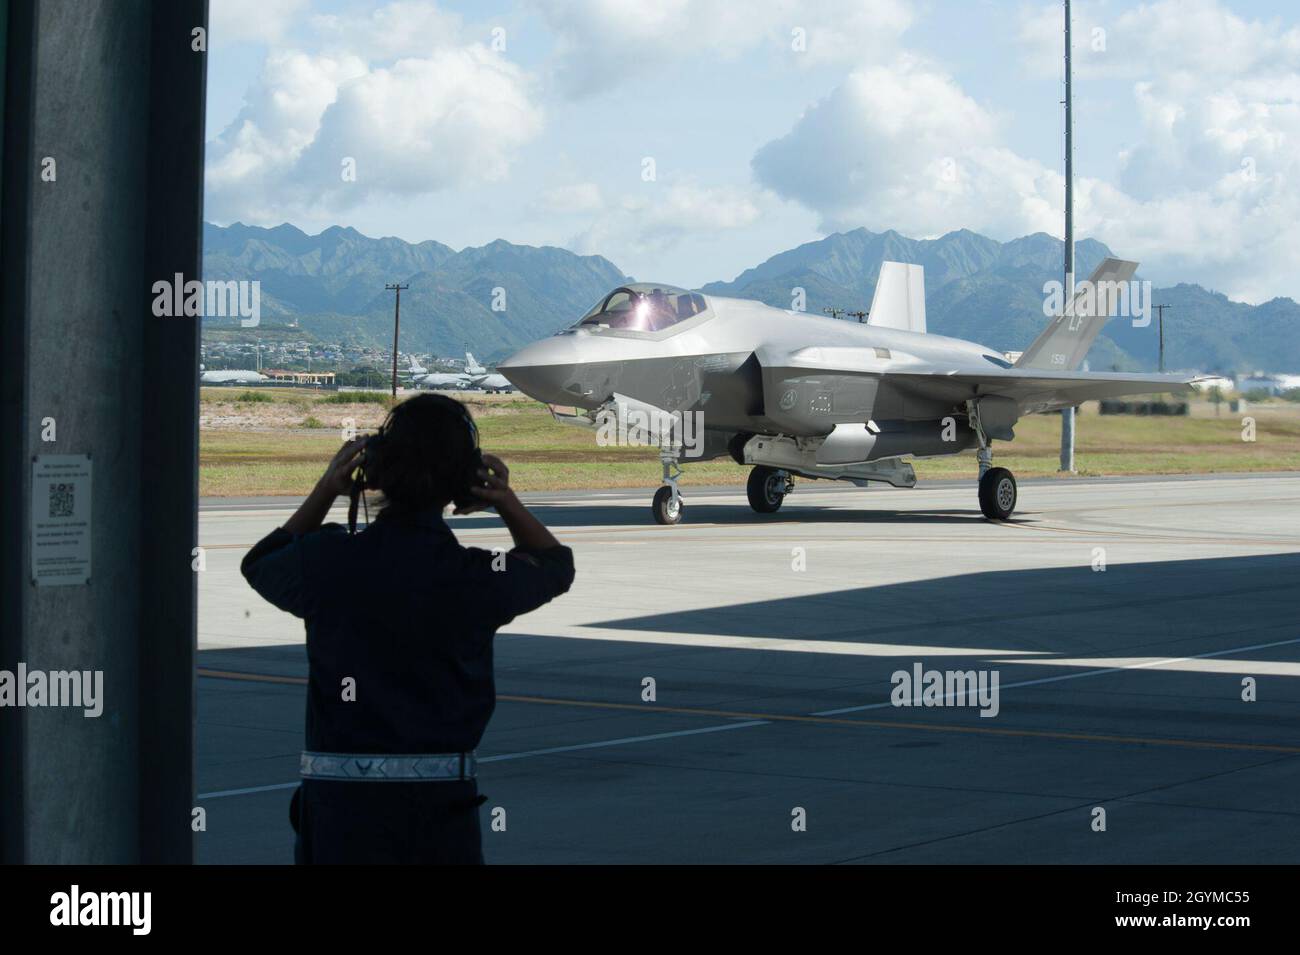 A Hawaii Air National Guard F-22 Raptor crew chief observes an F-35A Lightning II taxi down the flight line Jan. 30, 2020, at Joint Base Pearl Harbor-Hickam, Hawaii. Lightning II aircraft, assigned to Luke Air Force Base, Ariz., temporarily relocated to Hawaii to join other flying squadrons in exercise Pacific Raptor. The exercise is held to integrate the world’s most advanced fifth-generation aircraft, practicing combat scenarios alongside designated ‘aggressor’ aircraft. (U.S. Air Force photo by Senior Airman John Linzmeier) Stock Photo